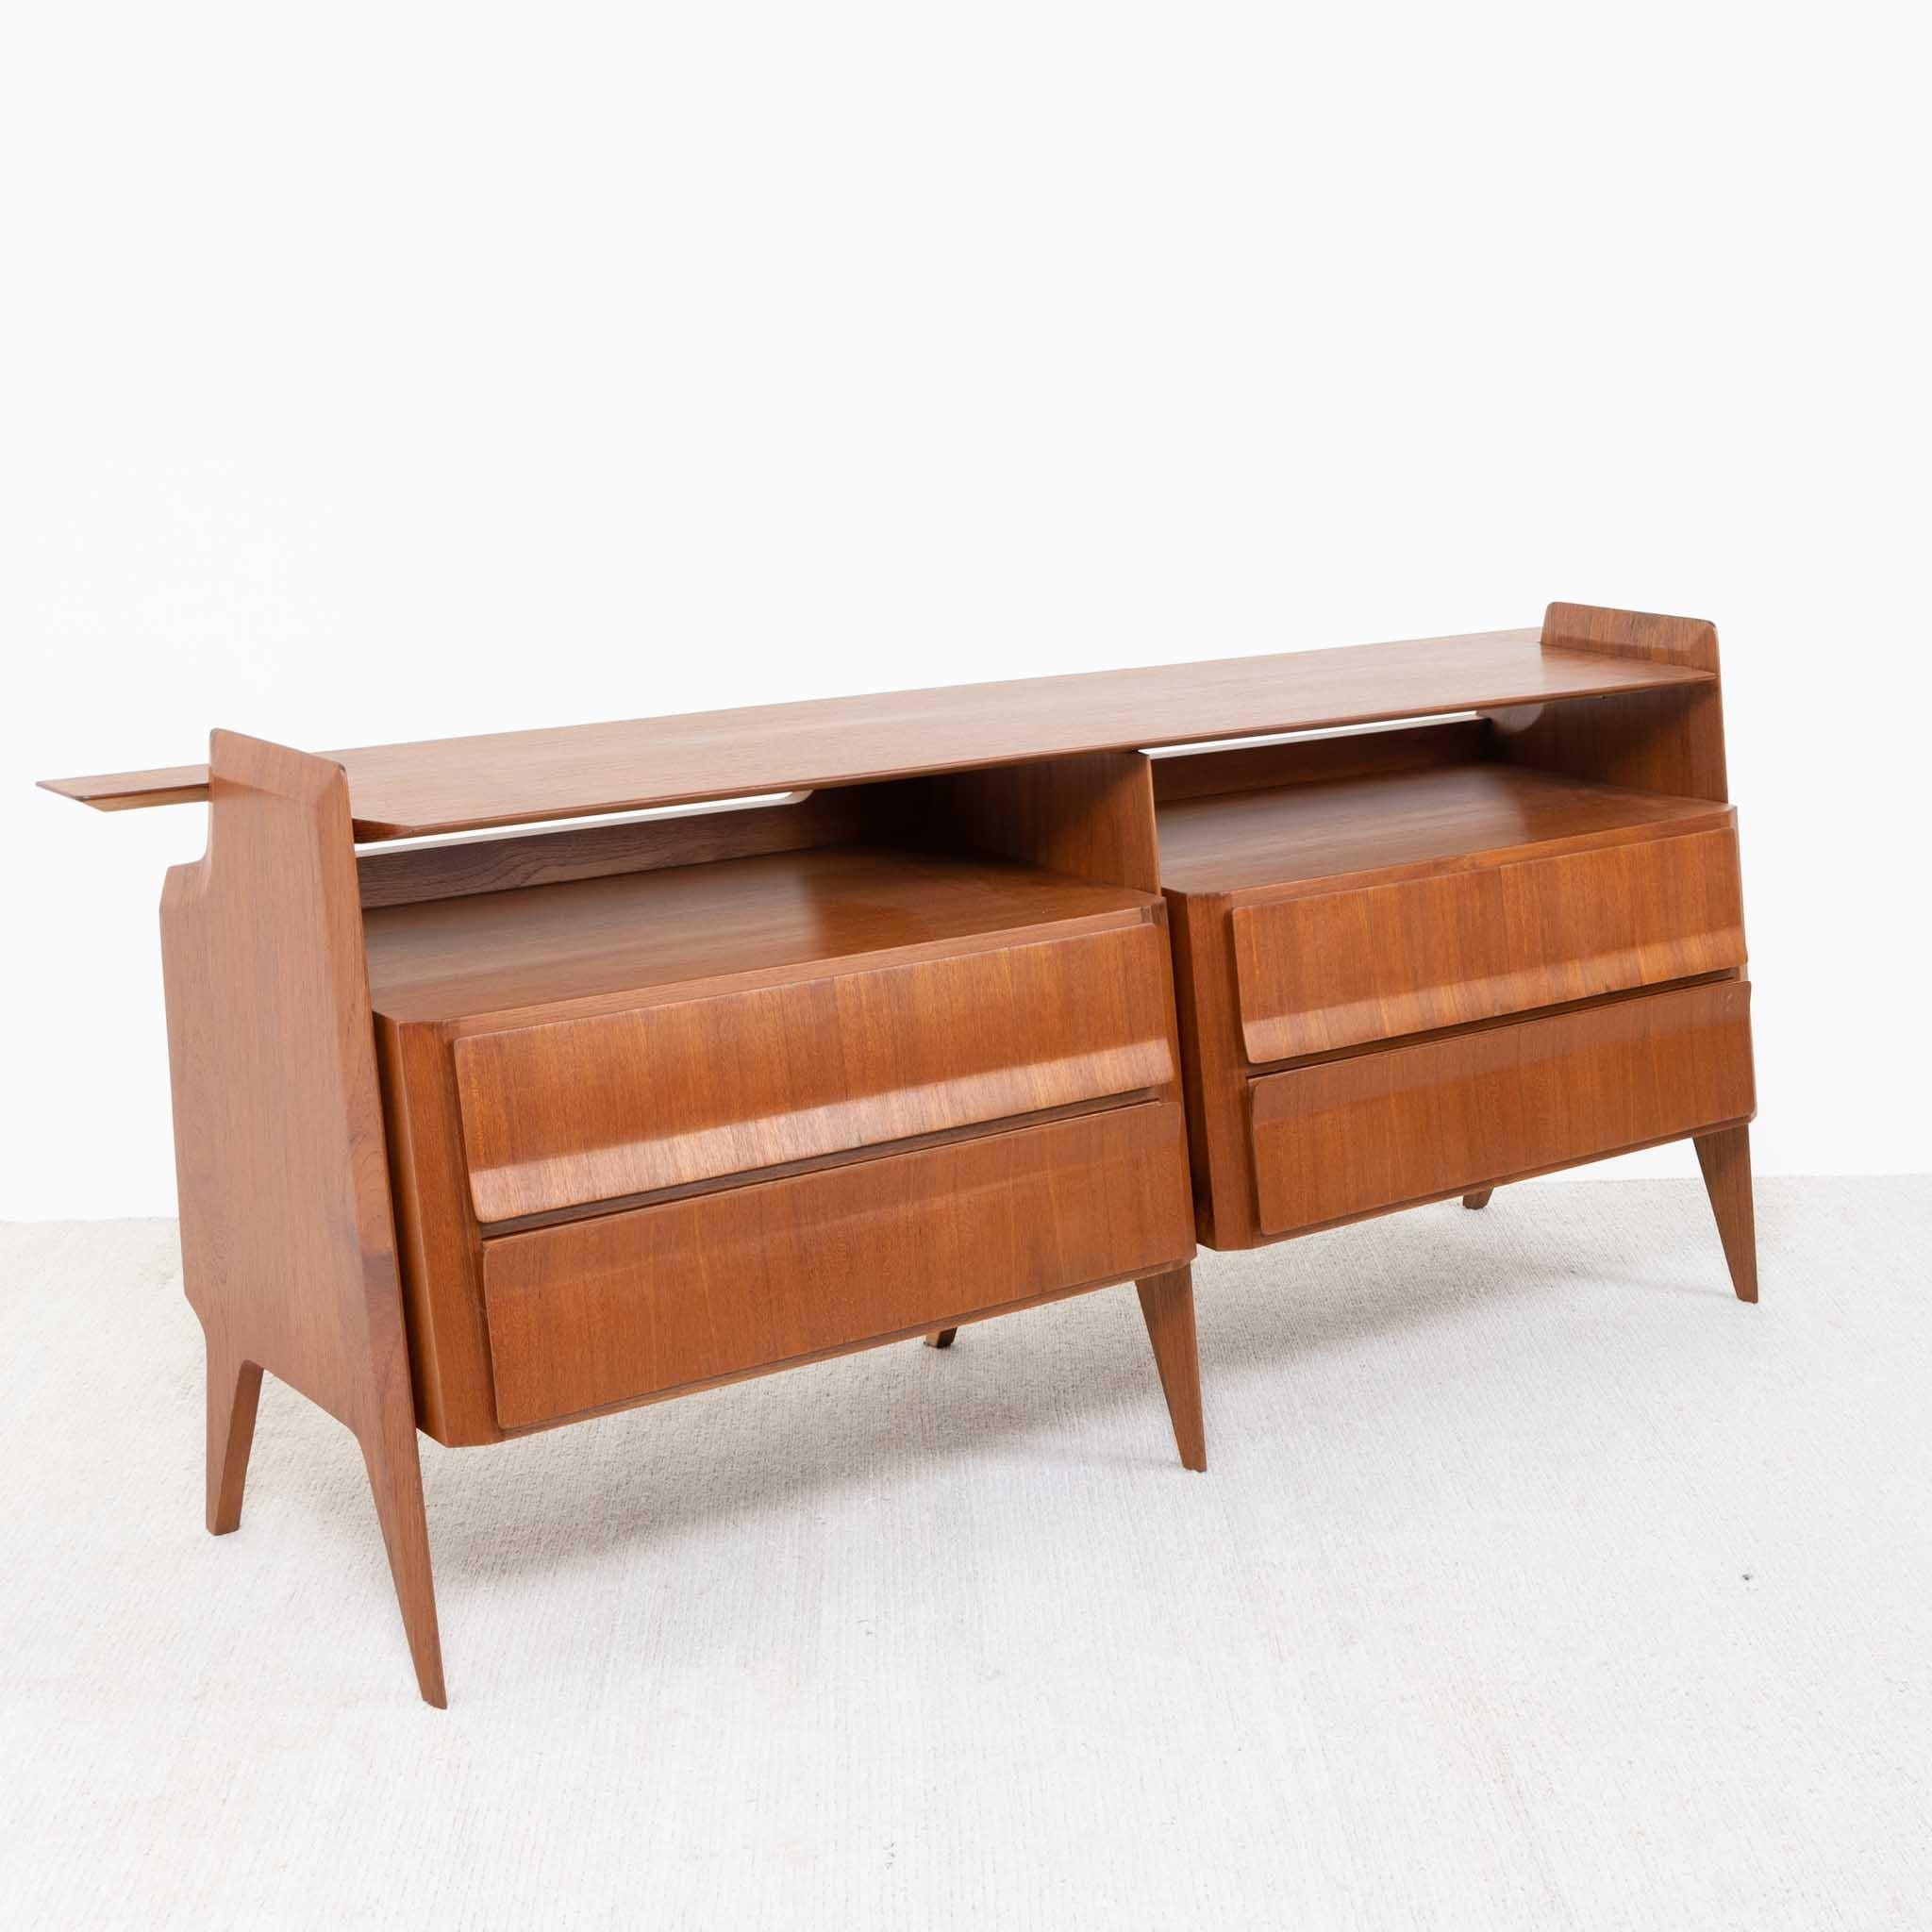 Italian mid-century sideboard featuring four drawers and a large full-length shelf that slightly protrudes over the sides, providing an intriguing profile. Crafted from solid and veneered teak, the surface boasts a matte polish. The drawer fronts